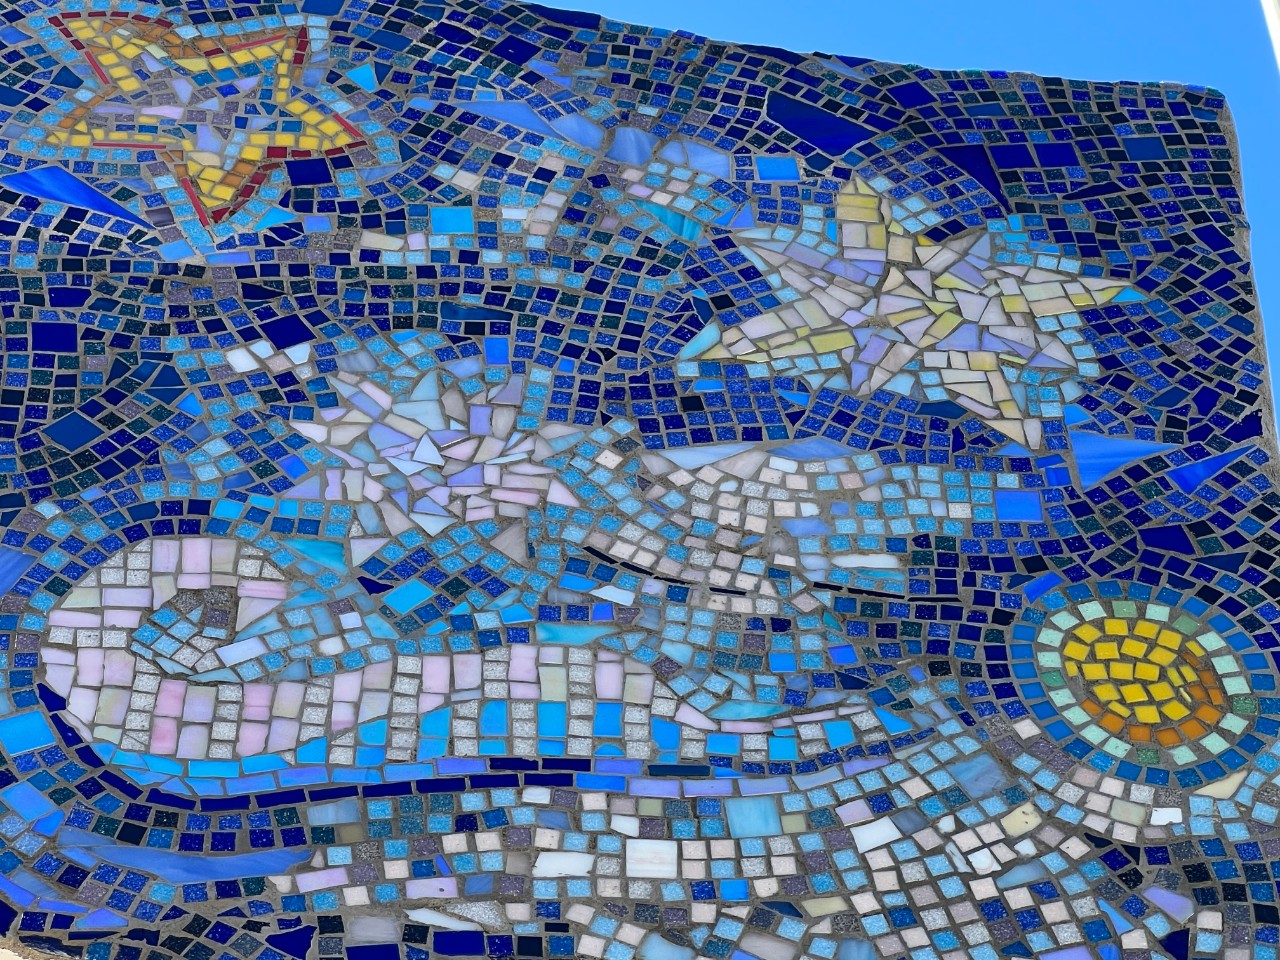 a detailed image of the blue mosaic sculpture depicting a sun, stars of differing sizes, waves and curls, etc.